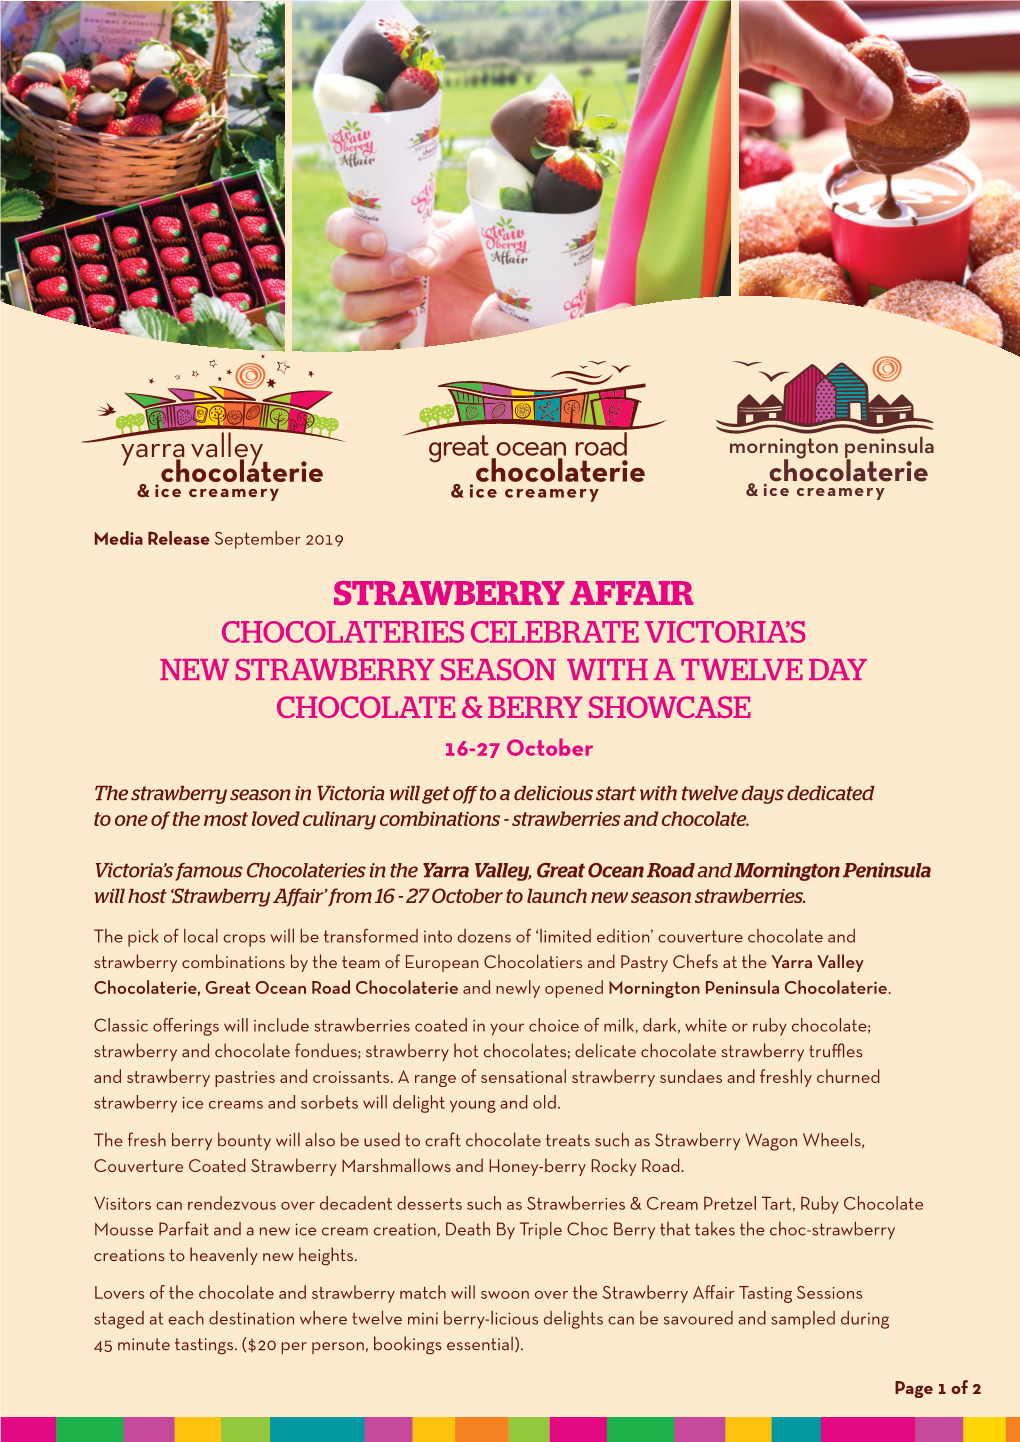 STRAWBERRY AFFAIR CHOCOLATERIES CELEBRATE VICTORIA’S NEW STRAWBERRY SEASON with a TWELVE DAY CHOCOLATE & BERRY SHOWCASE 16-27 October